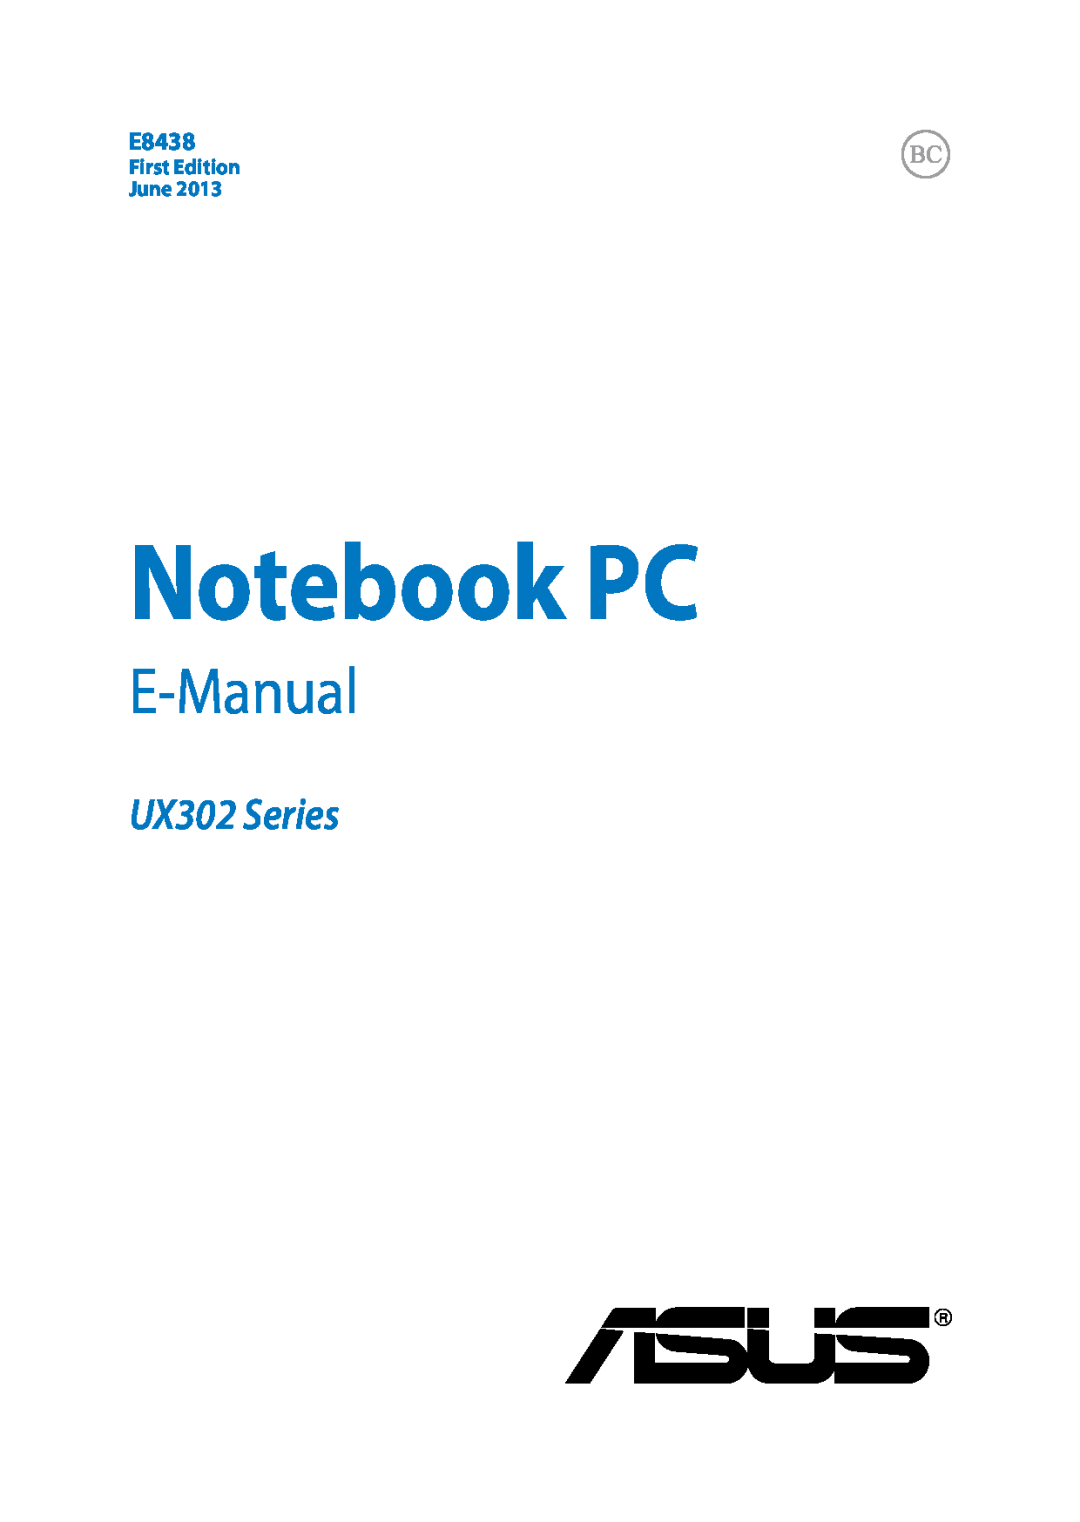 Asus E8438 manual Notebook PC, E-Manual, UX302 Series, First Edition June 